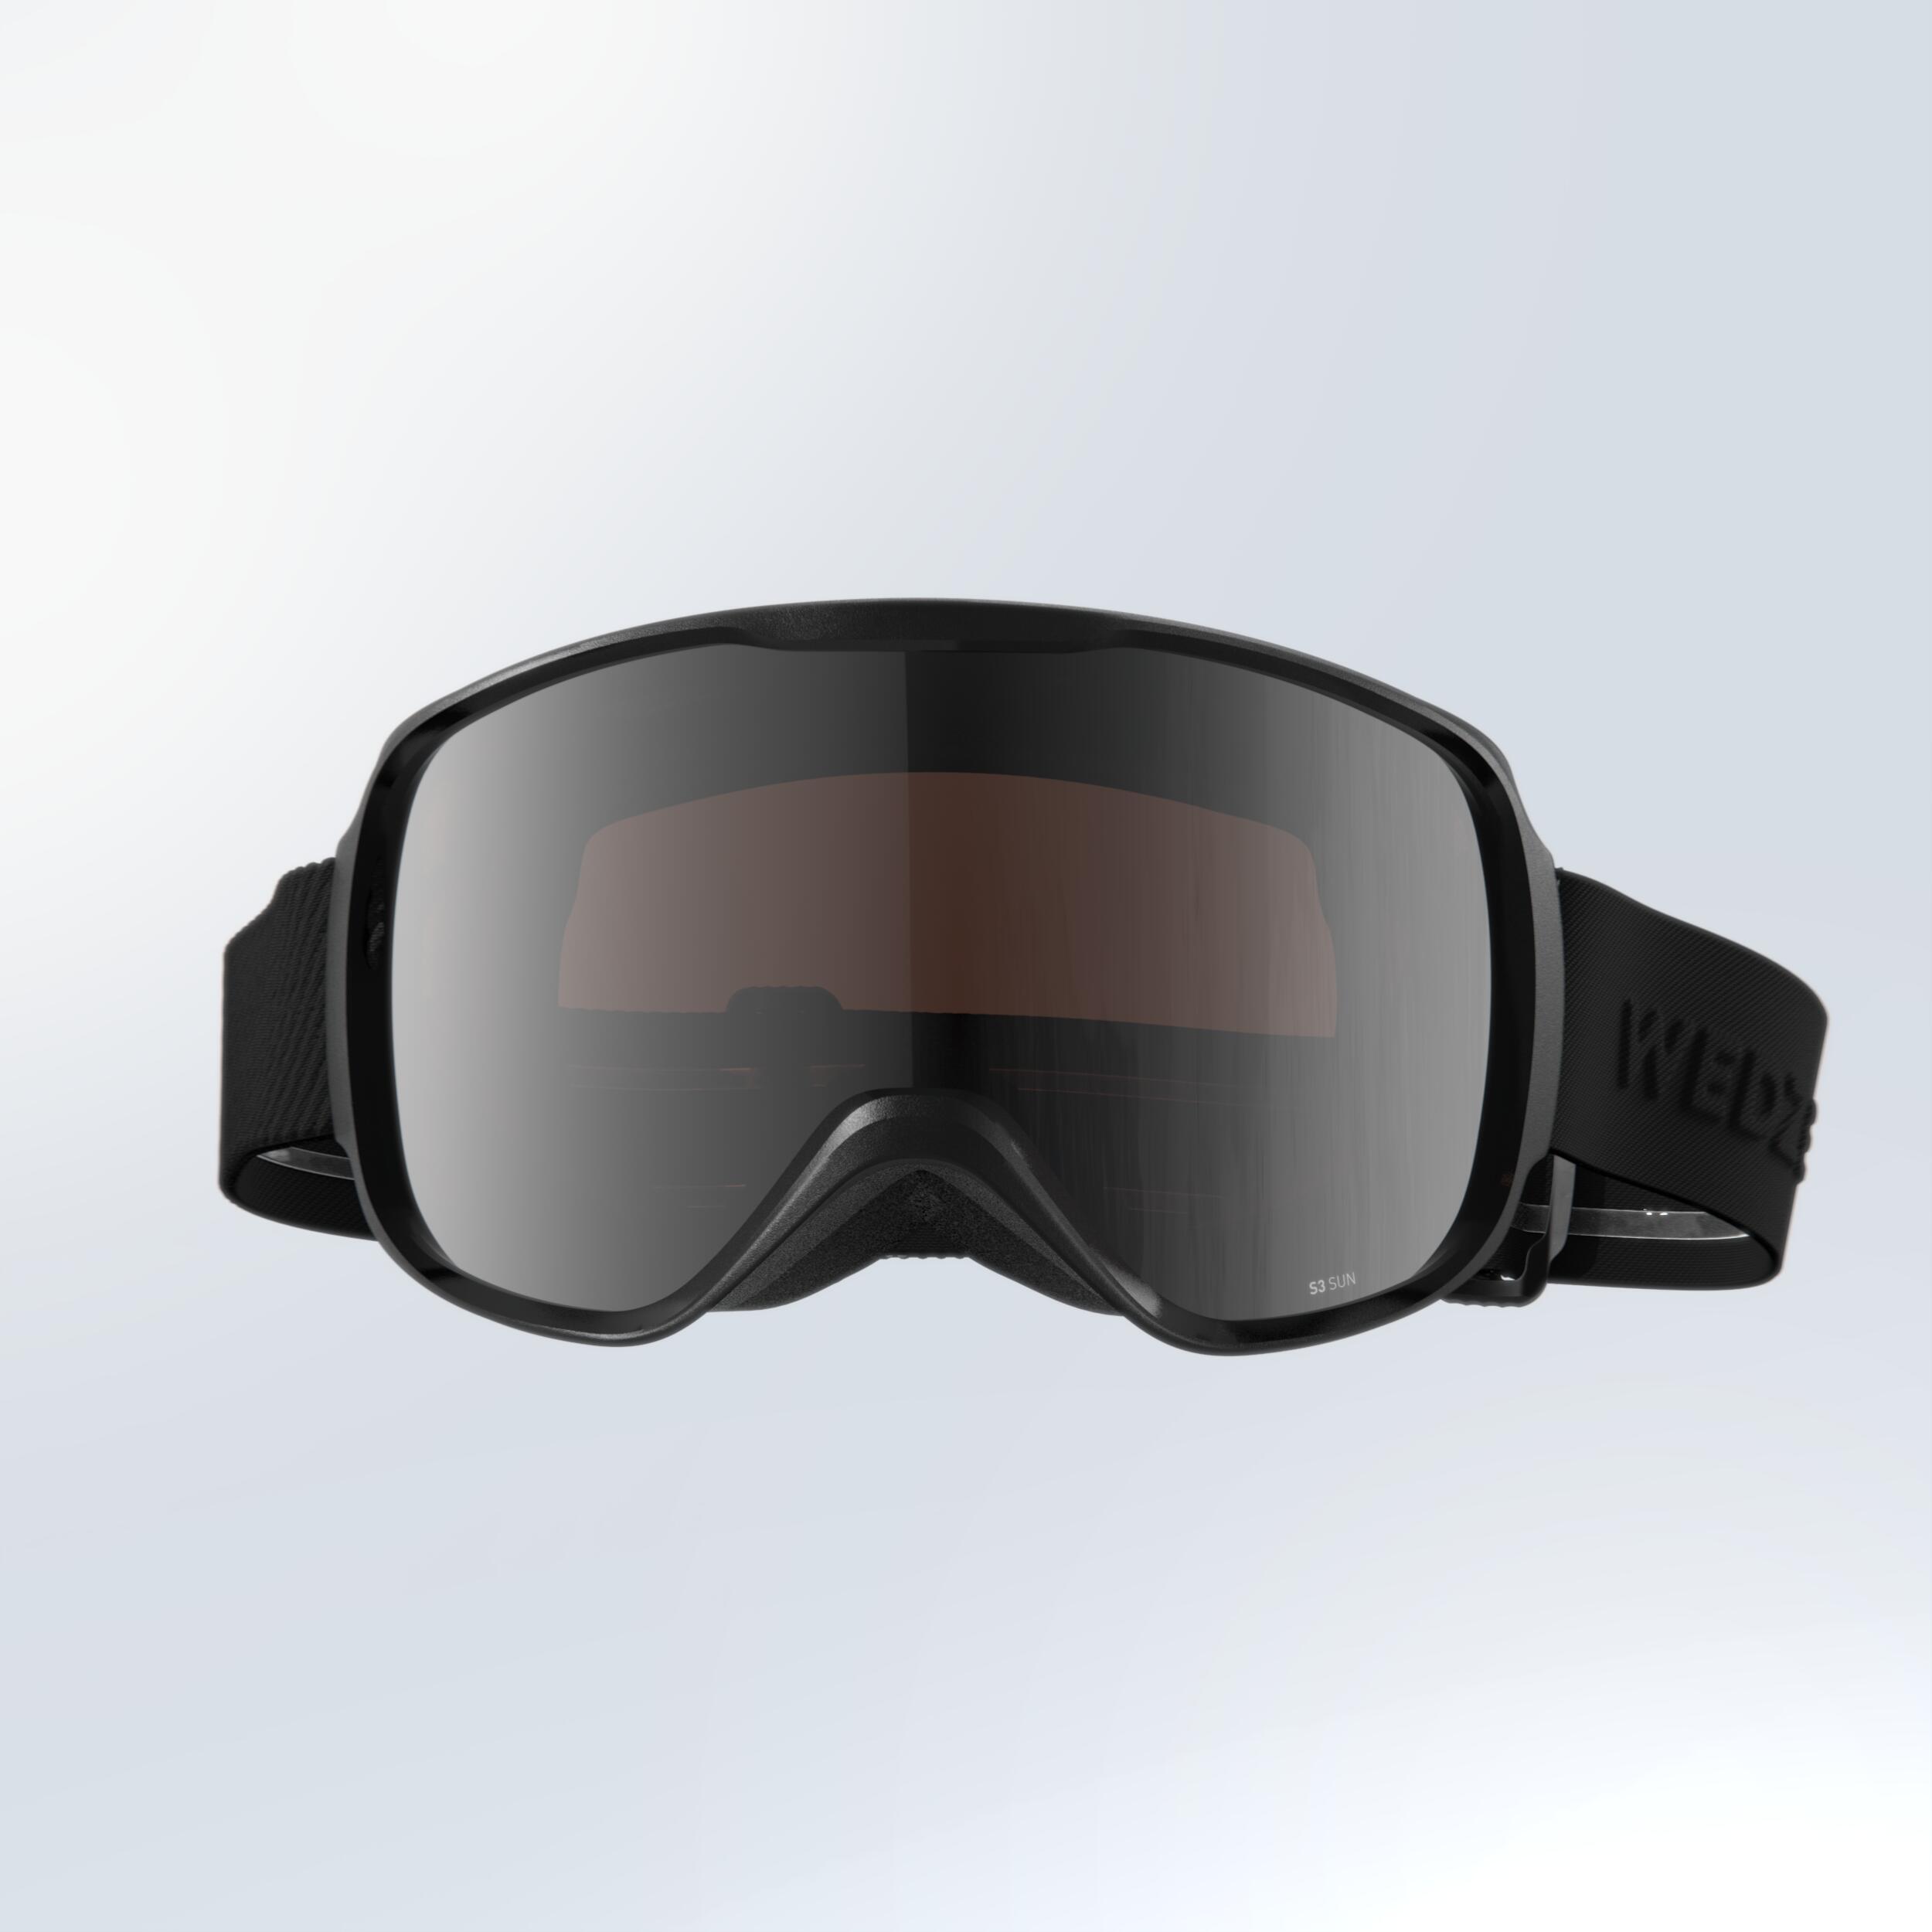 KIDS’ AND ADULT SKIING AND SNOWBOARDING GOGGLES GOOD WEATHER - G 500 S3 - BLACK 4/8